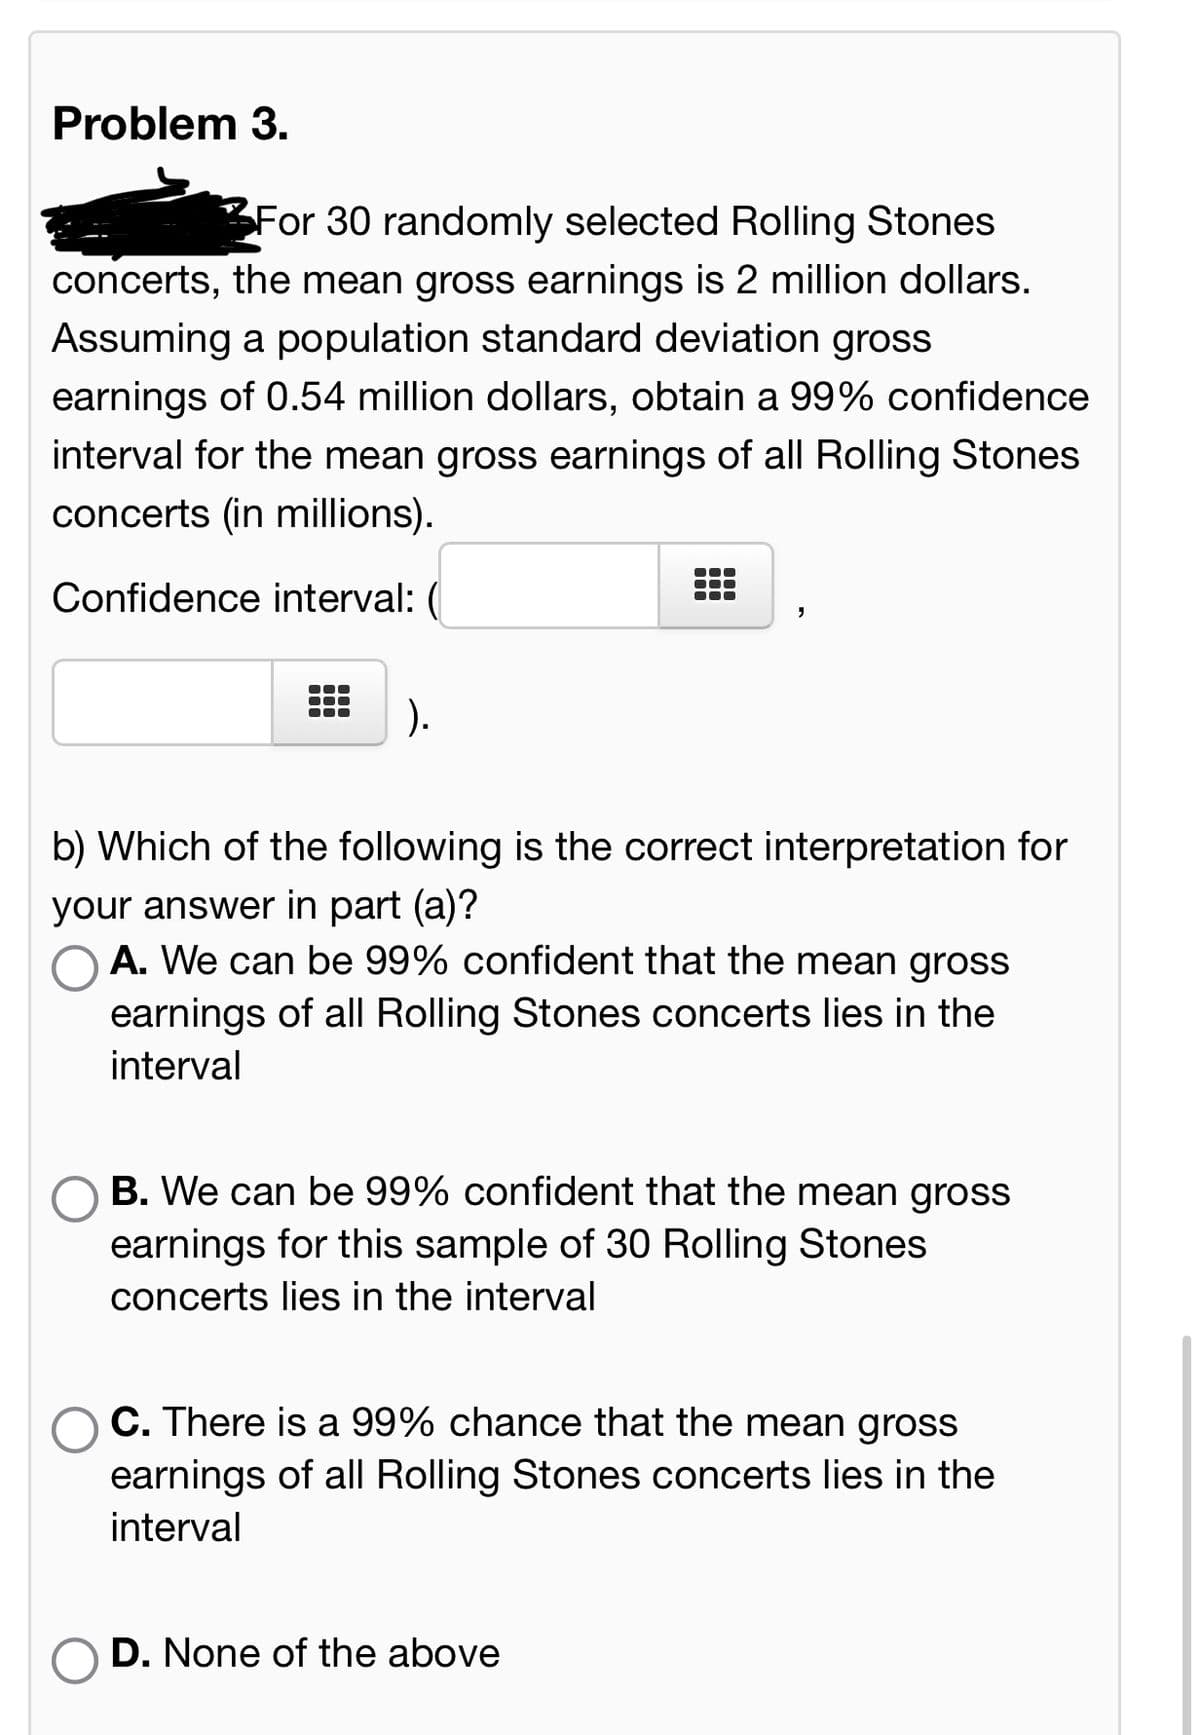 Problem 3.
For 30 randomly selected Rolling Stones
concerts, the mean gross earnings is 2 million dollars.
Assuming a population standard deviation gross
earnings of 0.54 million dollars, obtain a 99% confidence
interval for the mean gross earnings of all Rolling Stones
concerts (in millions).
Confidence interval:
).
b) Which of the following is the correct interpretation for
your answer in part (a)?
A. We can be 99% confident that the mean gross
earnings of all Rolling Stones concerts lies in the
interval
B. We can be 99% confident that the mean gross
earnings for this sample of 30 Rolling Stones
concerts lies in the interval
C. There is a 99% chance that the mean gross
earnings of all Rolling Stones concerts lies in the
interval
D. None of the above